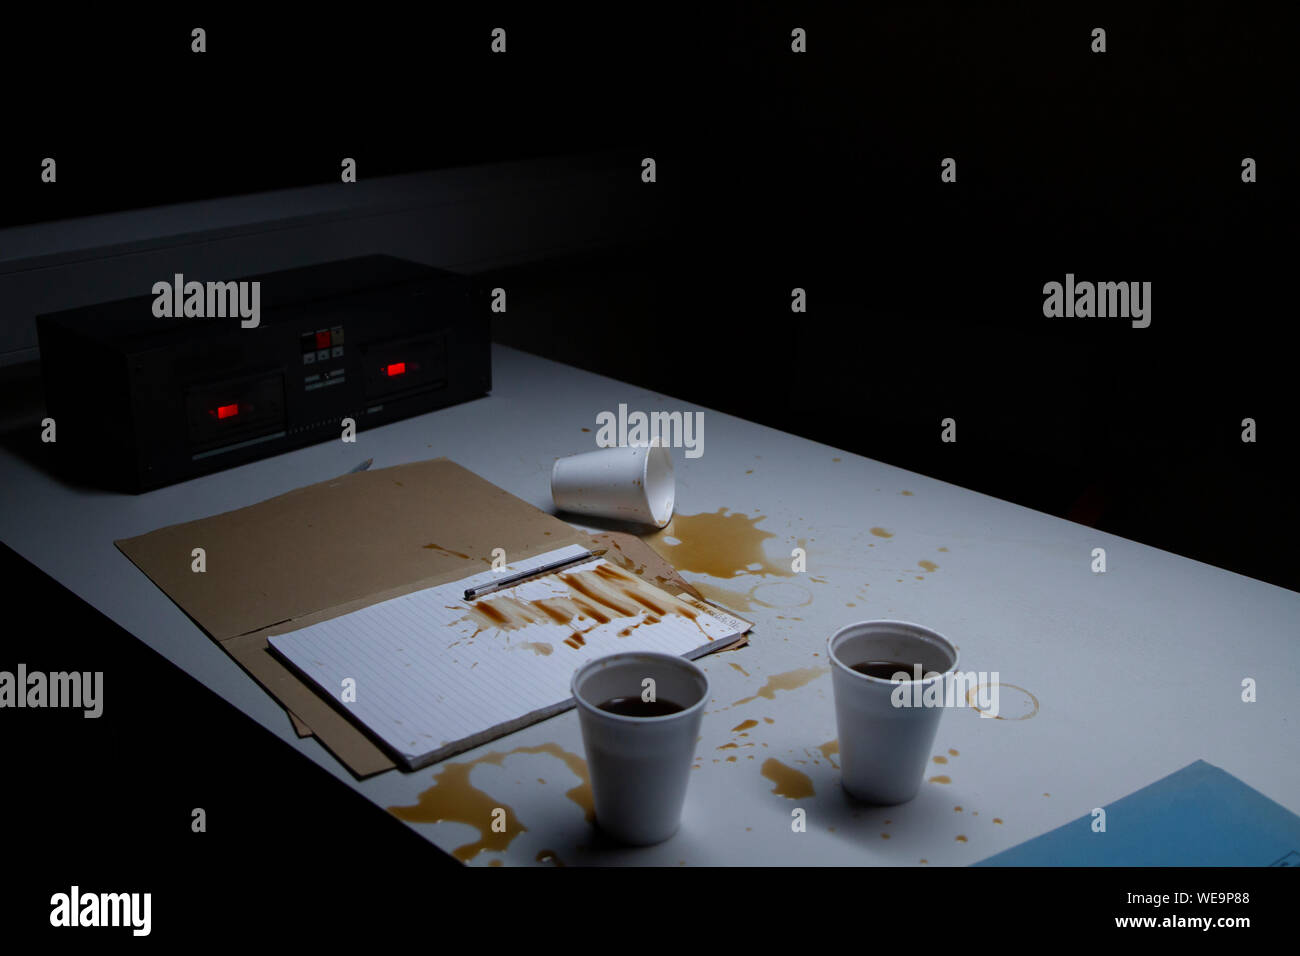 Police Custody Interview Room - Spilled Coffee Following a Confrontation Stock Photo